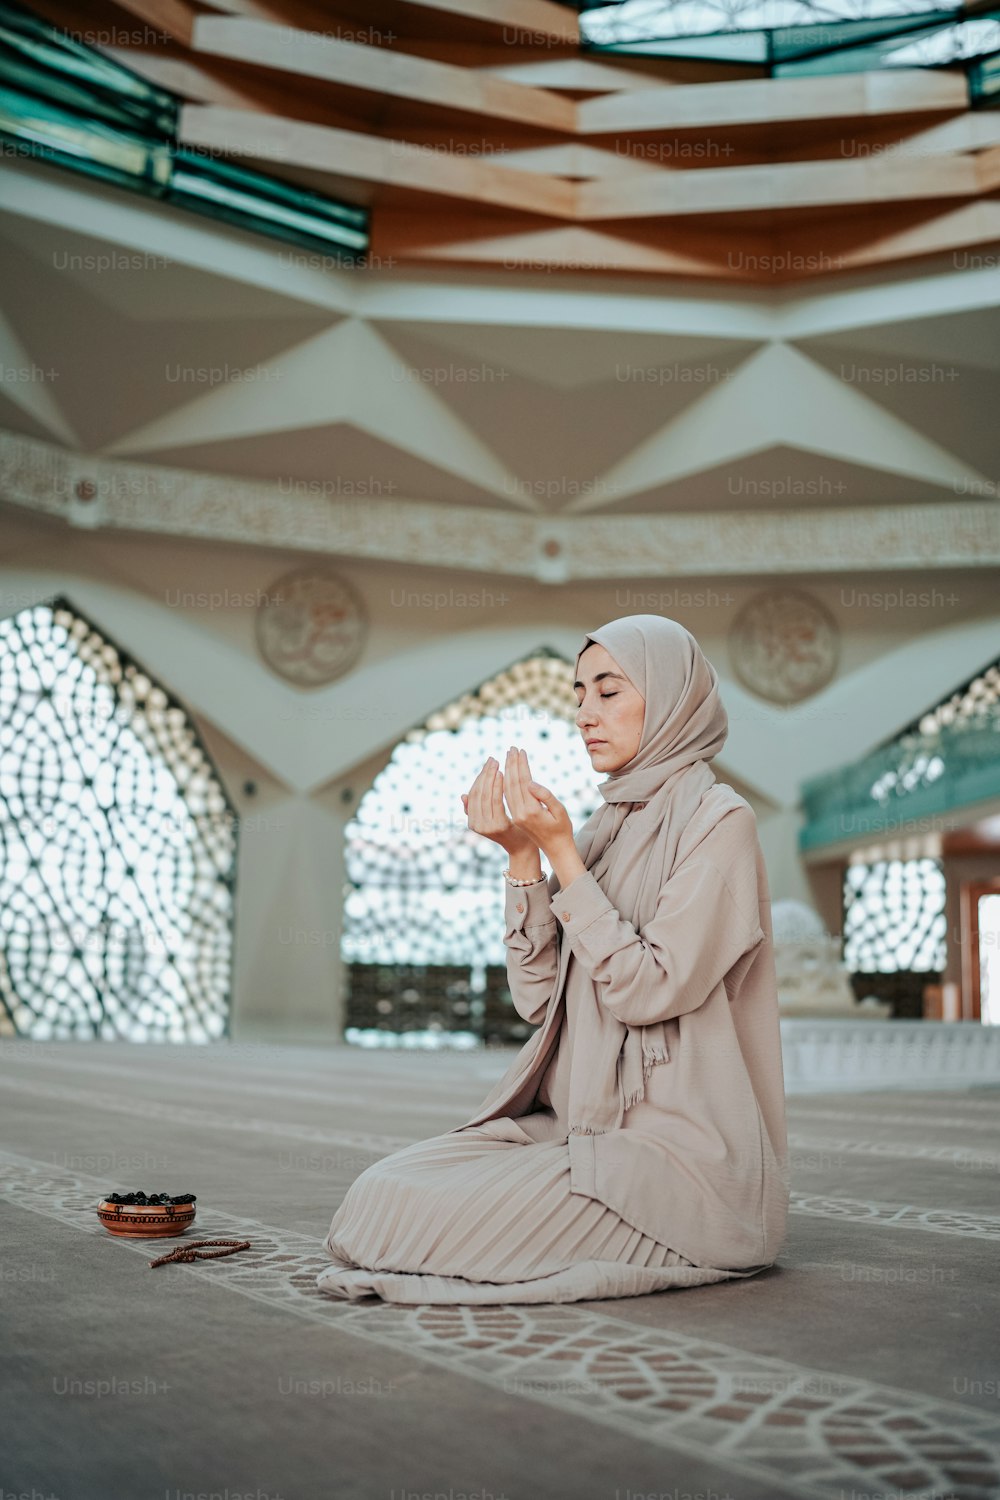 a woman sitting on the floor praying in a mosque